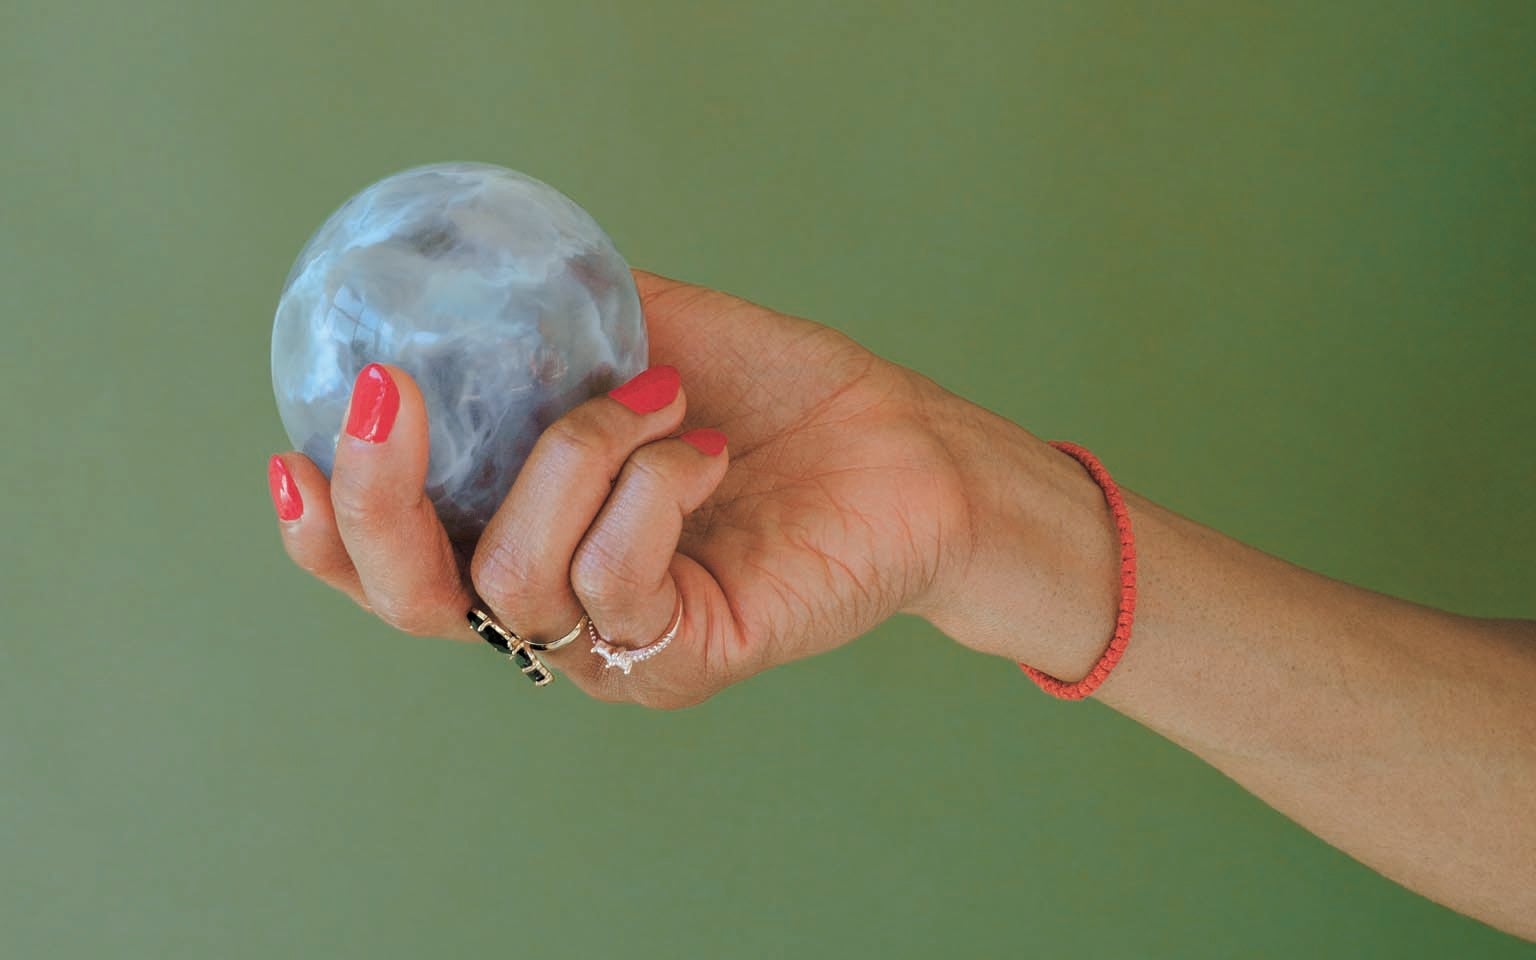 A hand holding a 3-D-printed globe against a green background.